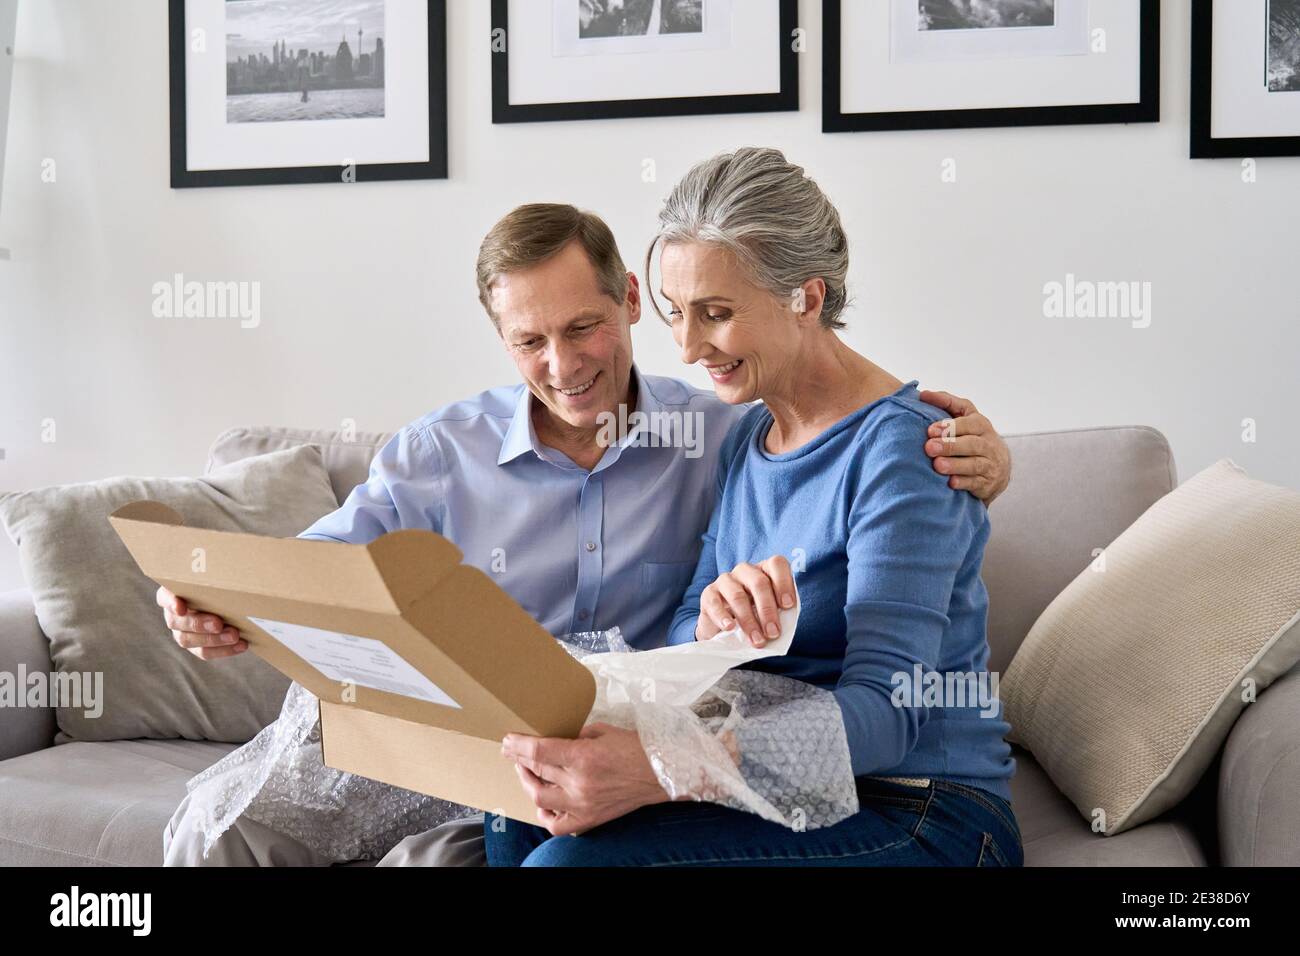 Happy older mature couple customers unpacking parcel sitting at home on couch. Stock Photo